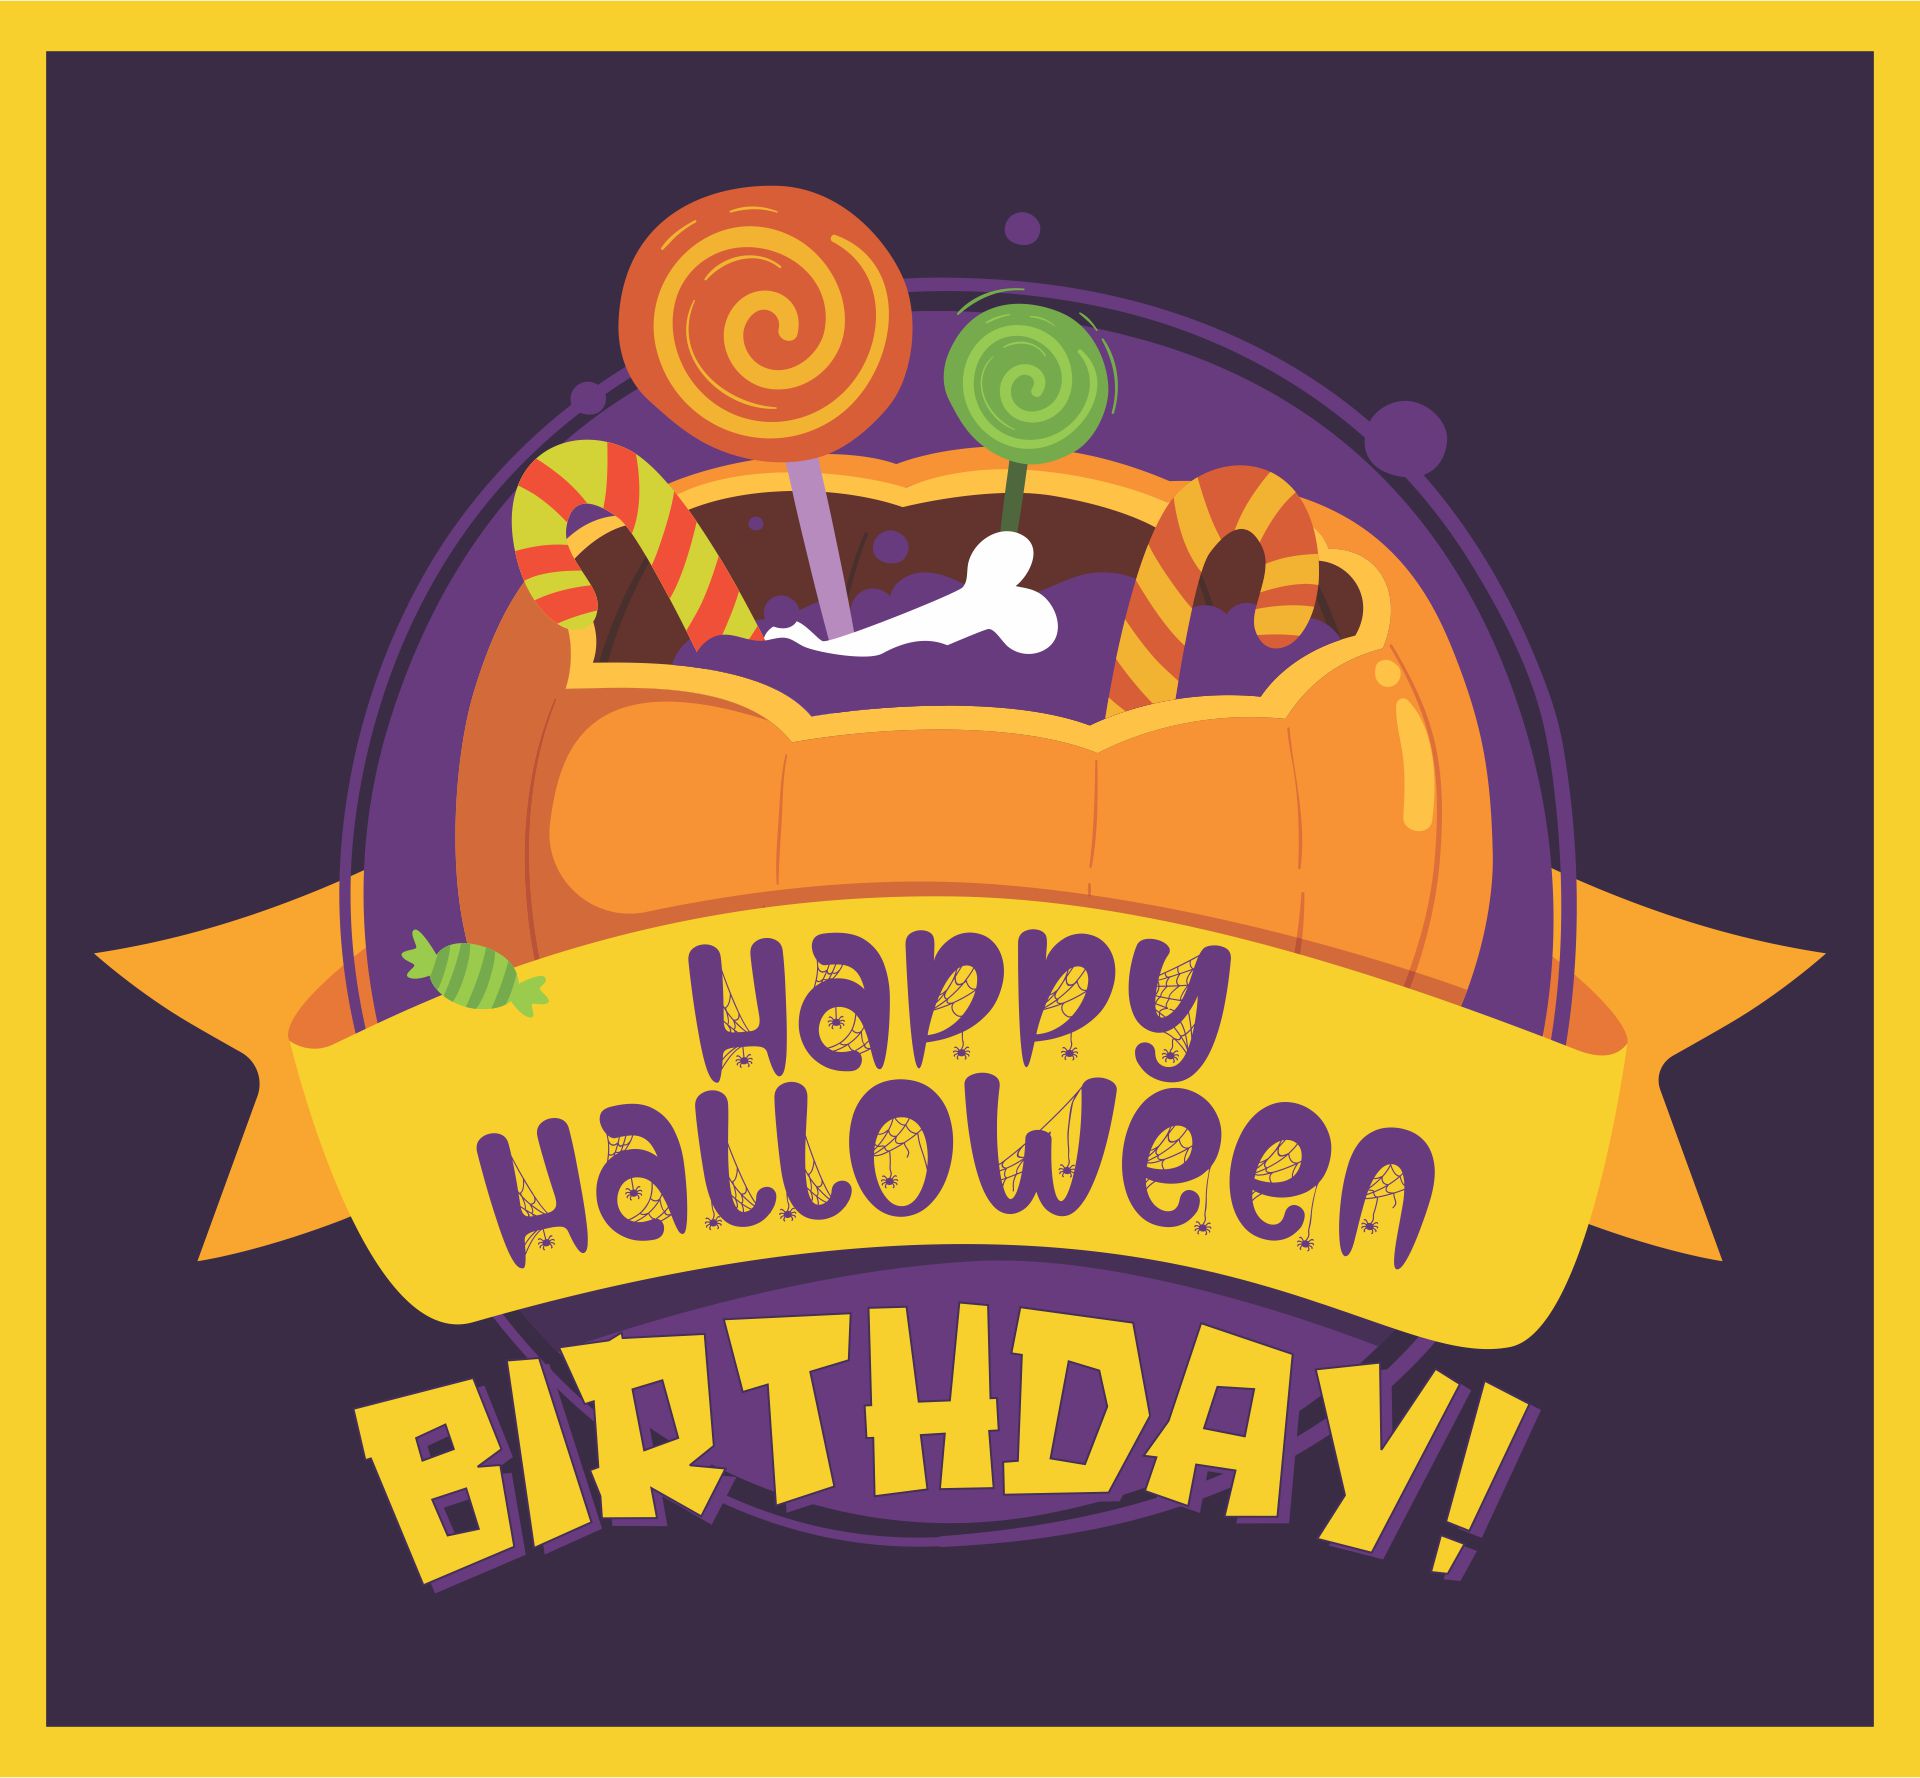 4 Best Images of Happy Halloween Greeting Cards Printable Free